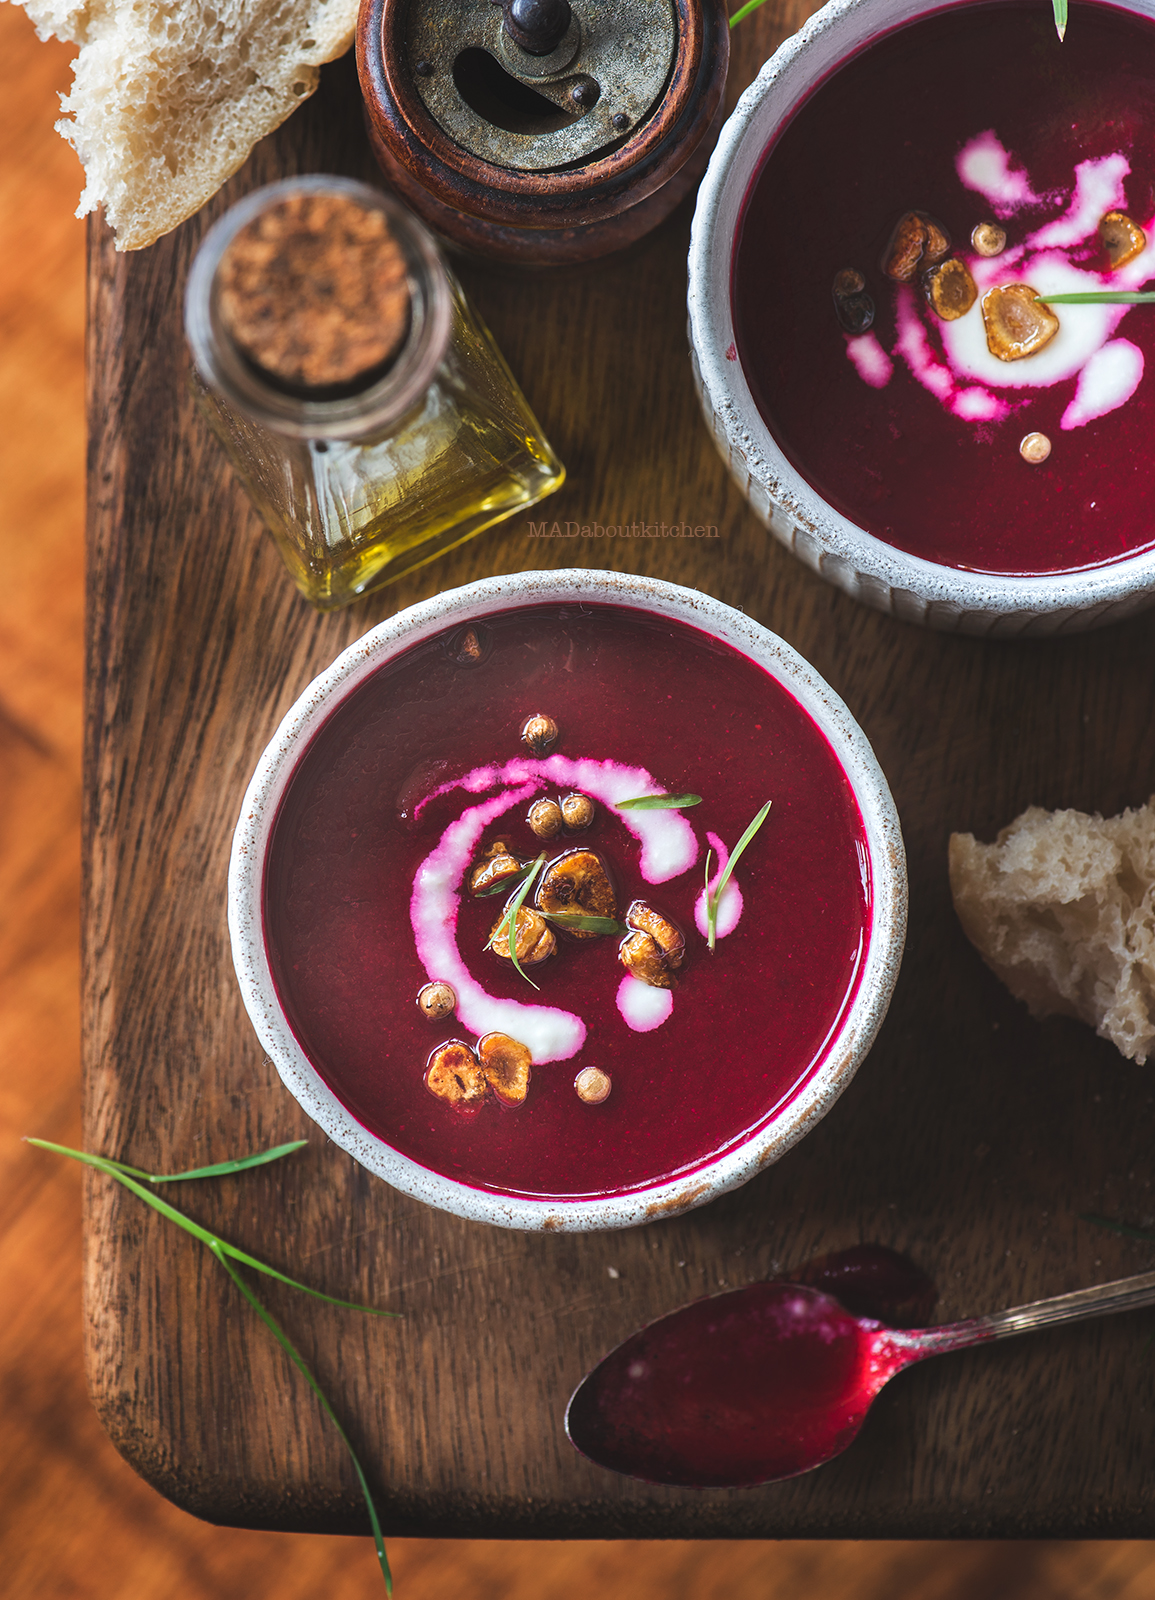 Roasted beetroot soup is spicy soup with an extremely strong beet flavour. If you are a fan of beets then this is a soup that you must try.